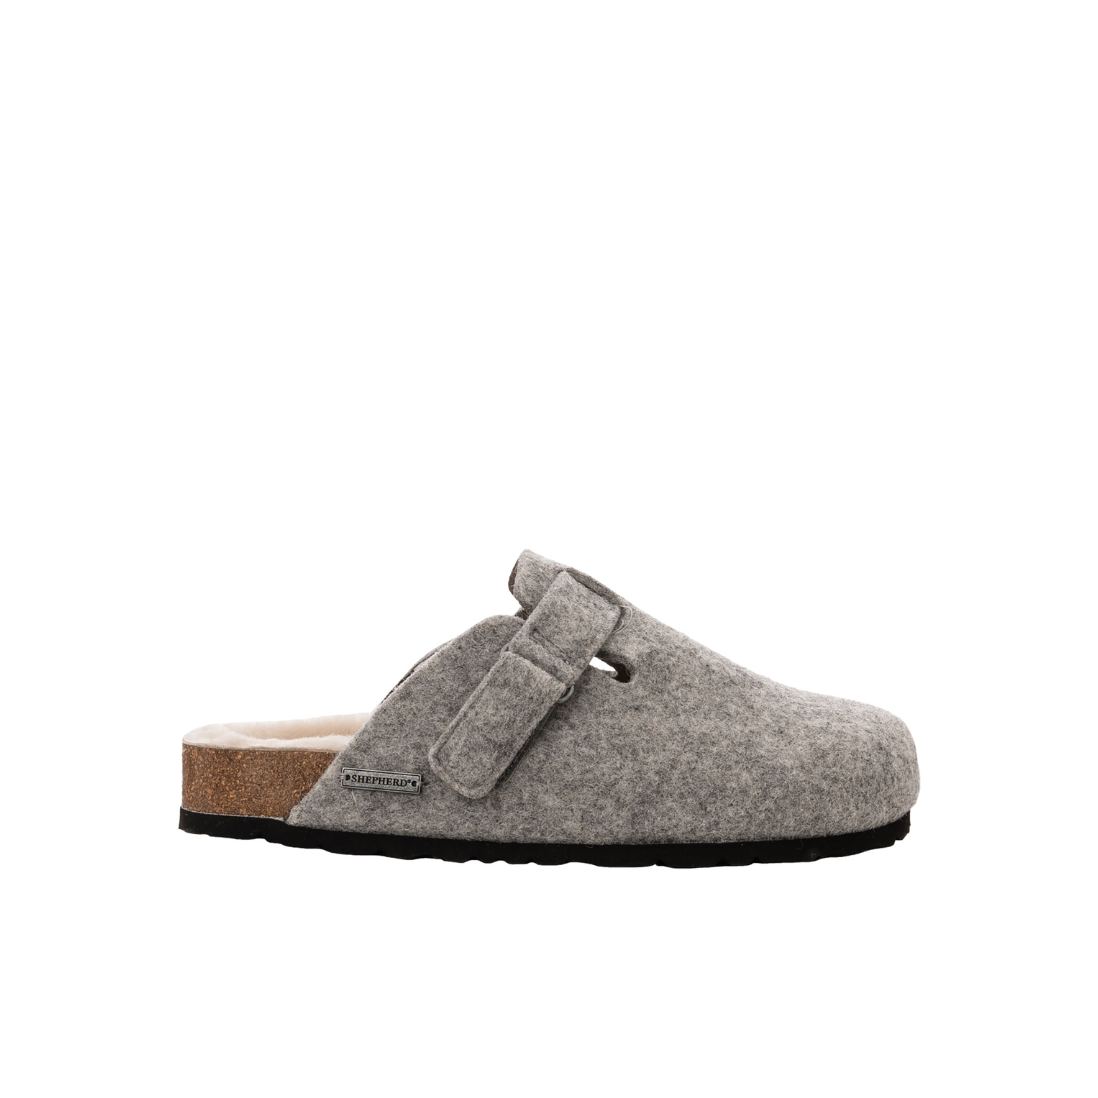 Shepherd of Sweden Hilma Slippers in grey wool. Brand new and available from our UK Independent store.  Seen here as a single slipper